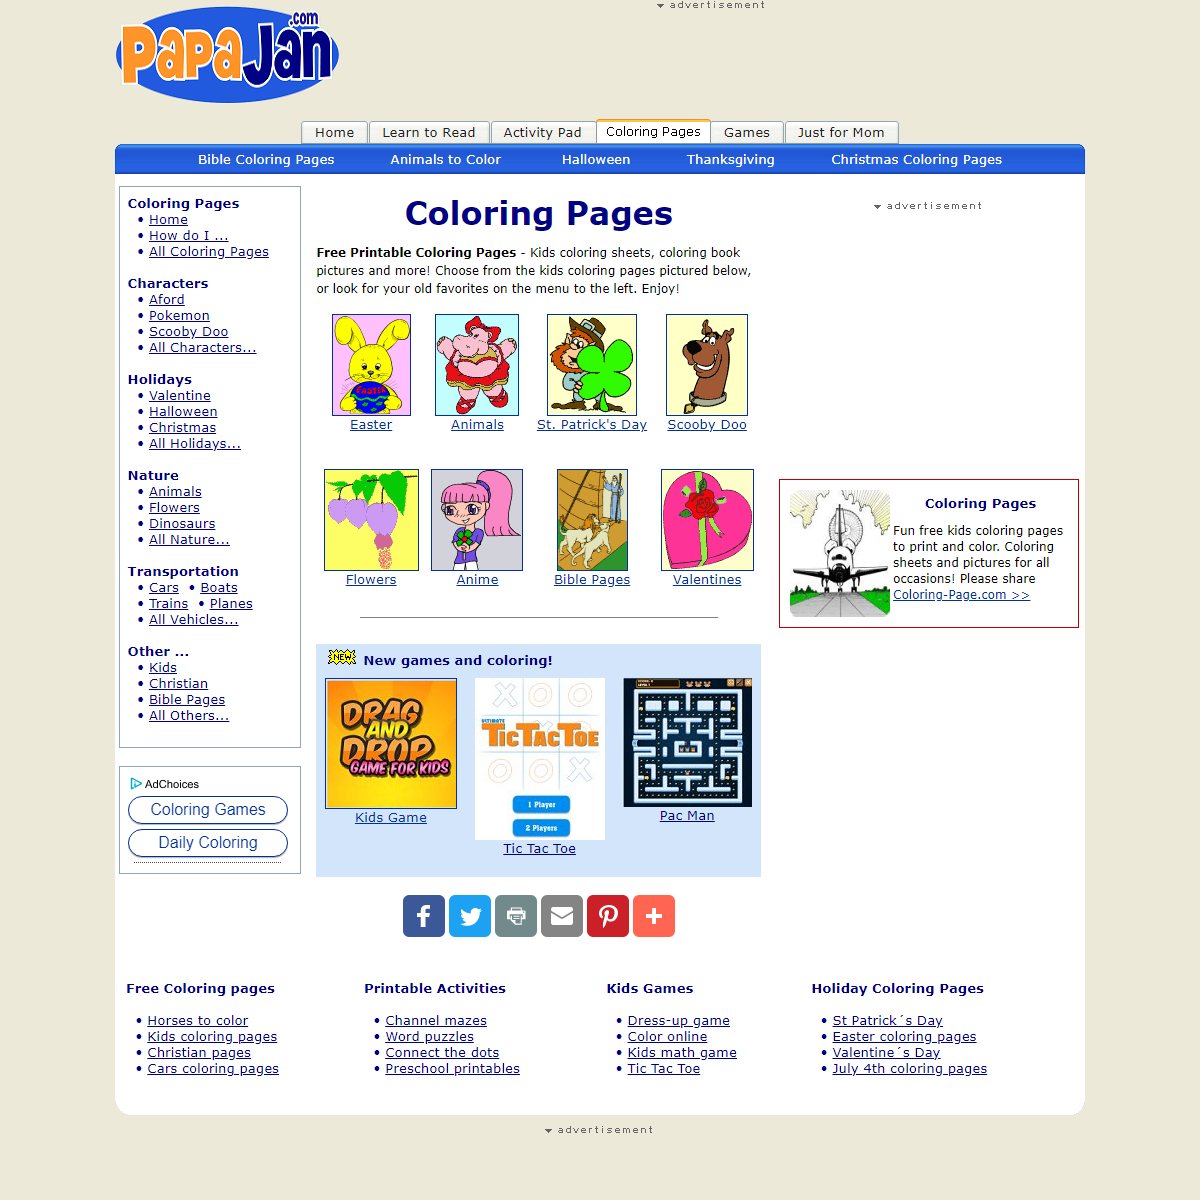 A complete backup of https://www.coloring-page.com/